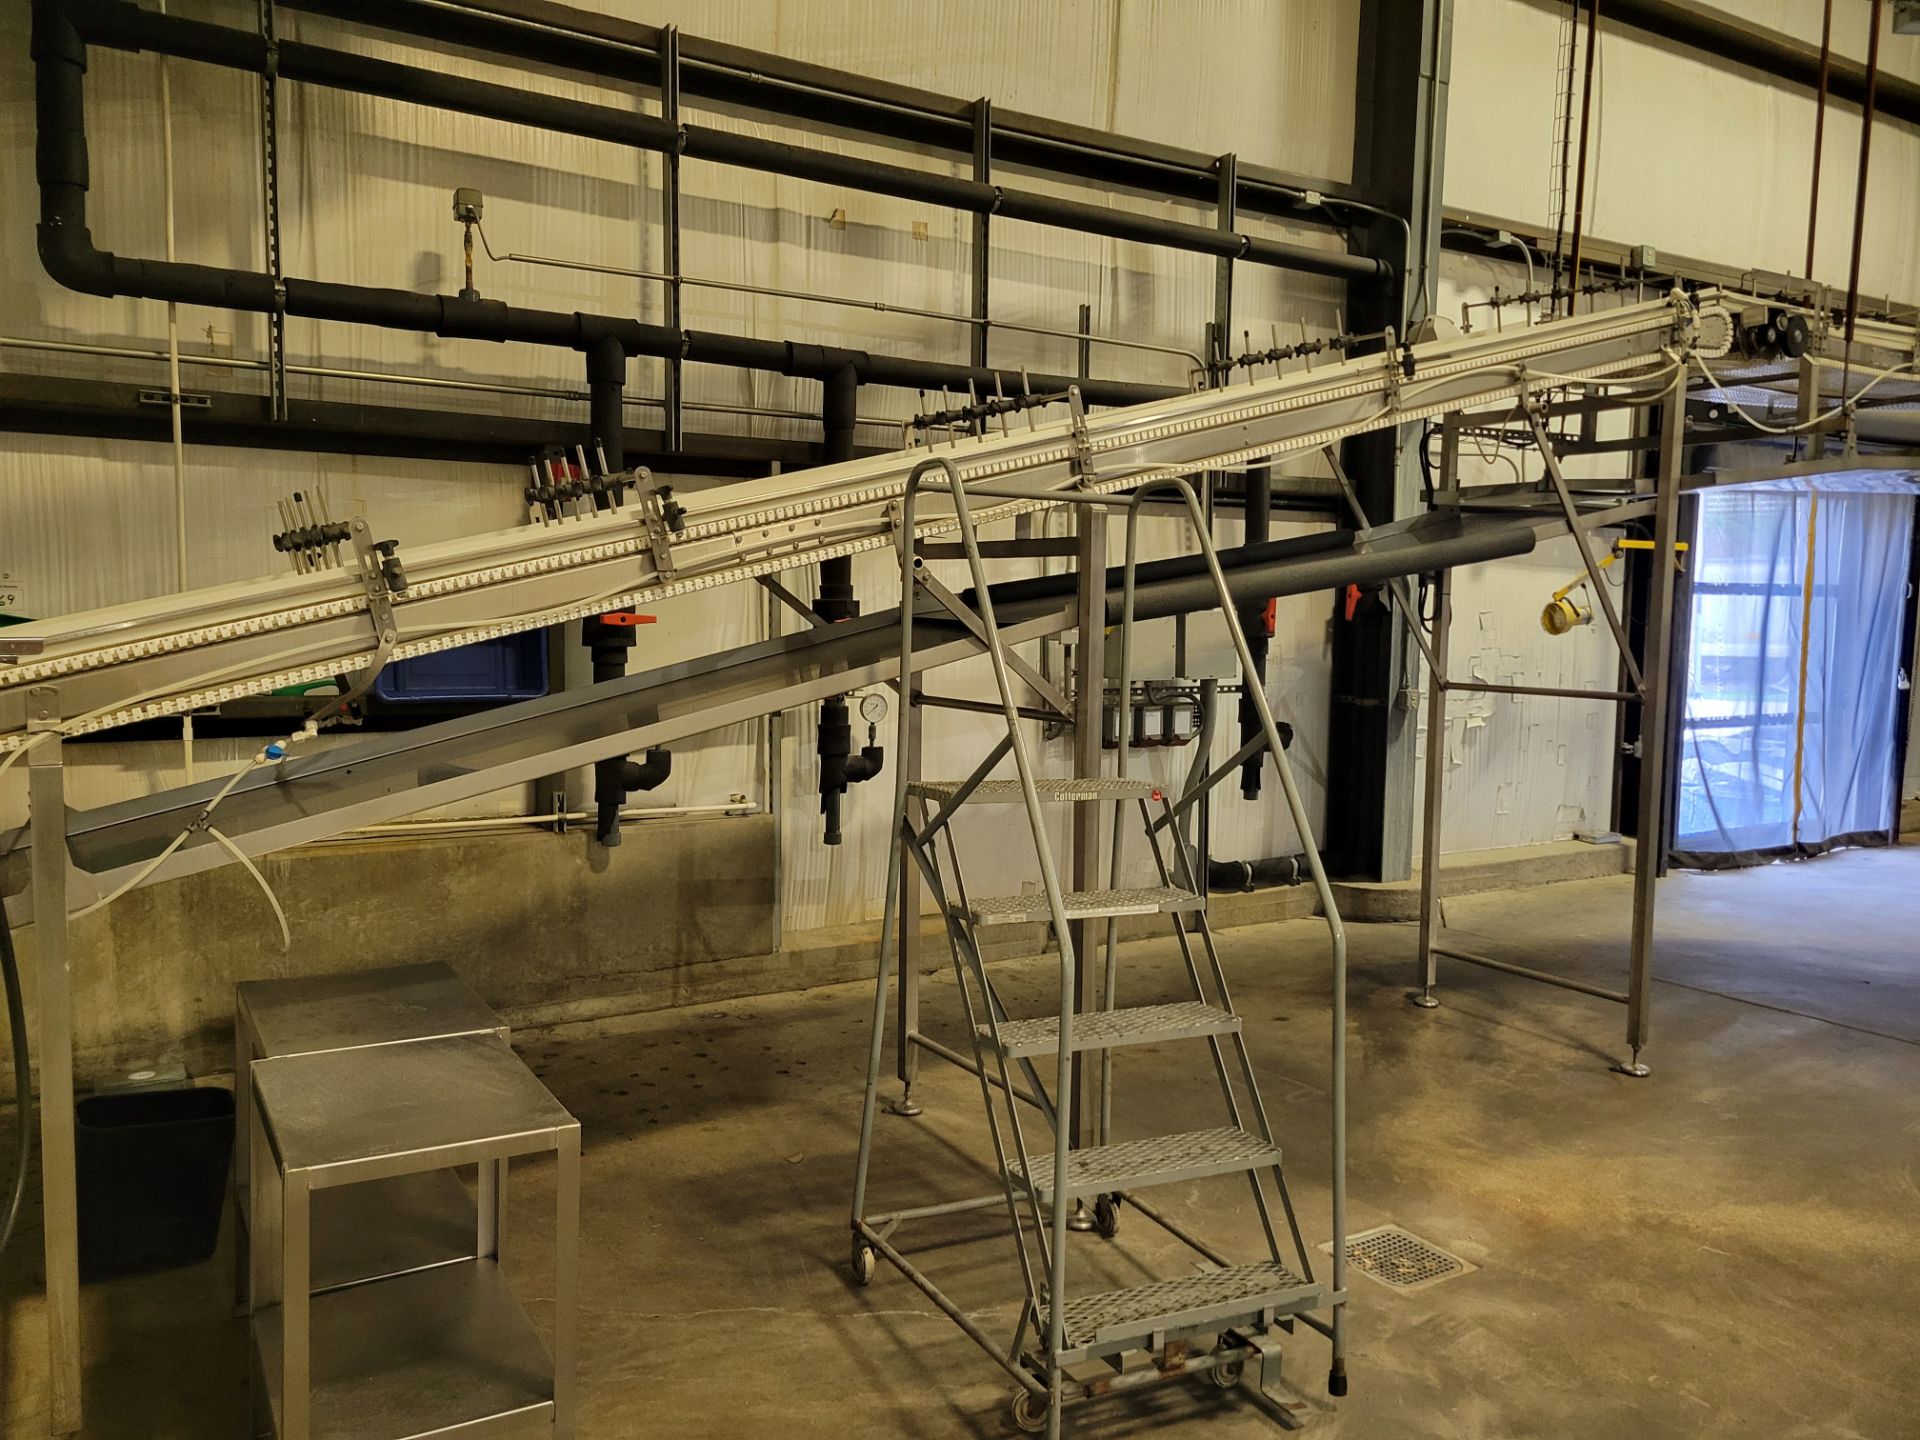 Conveyor from Fillers to Spiral Cooler - Image 10 of 15